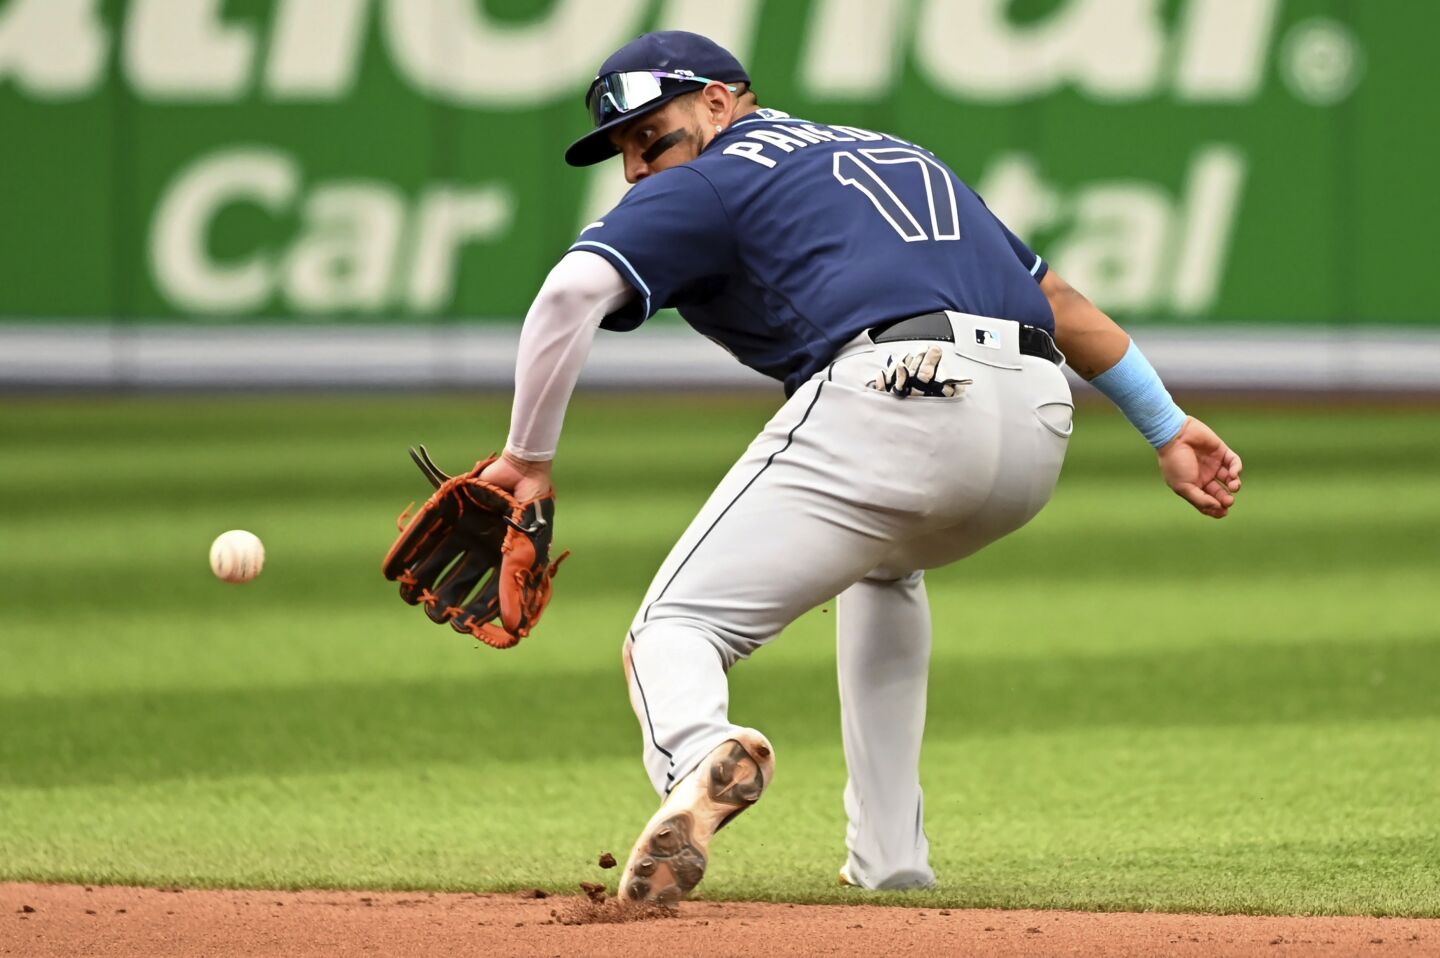 10 | Tampa Bay Rays (58-50; LW: 11)All the rage last year, Wander Franco won’t return from his hamate bone fracture for at least another couple weeks and who knows if he’ll have the strength to improve upon a disappointing .704 OPS.